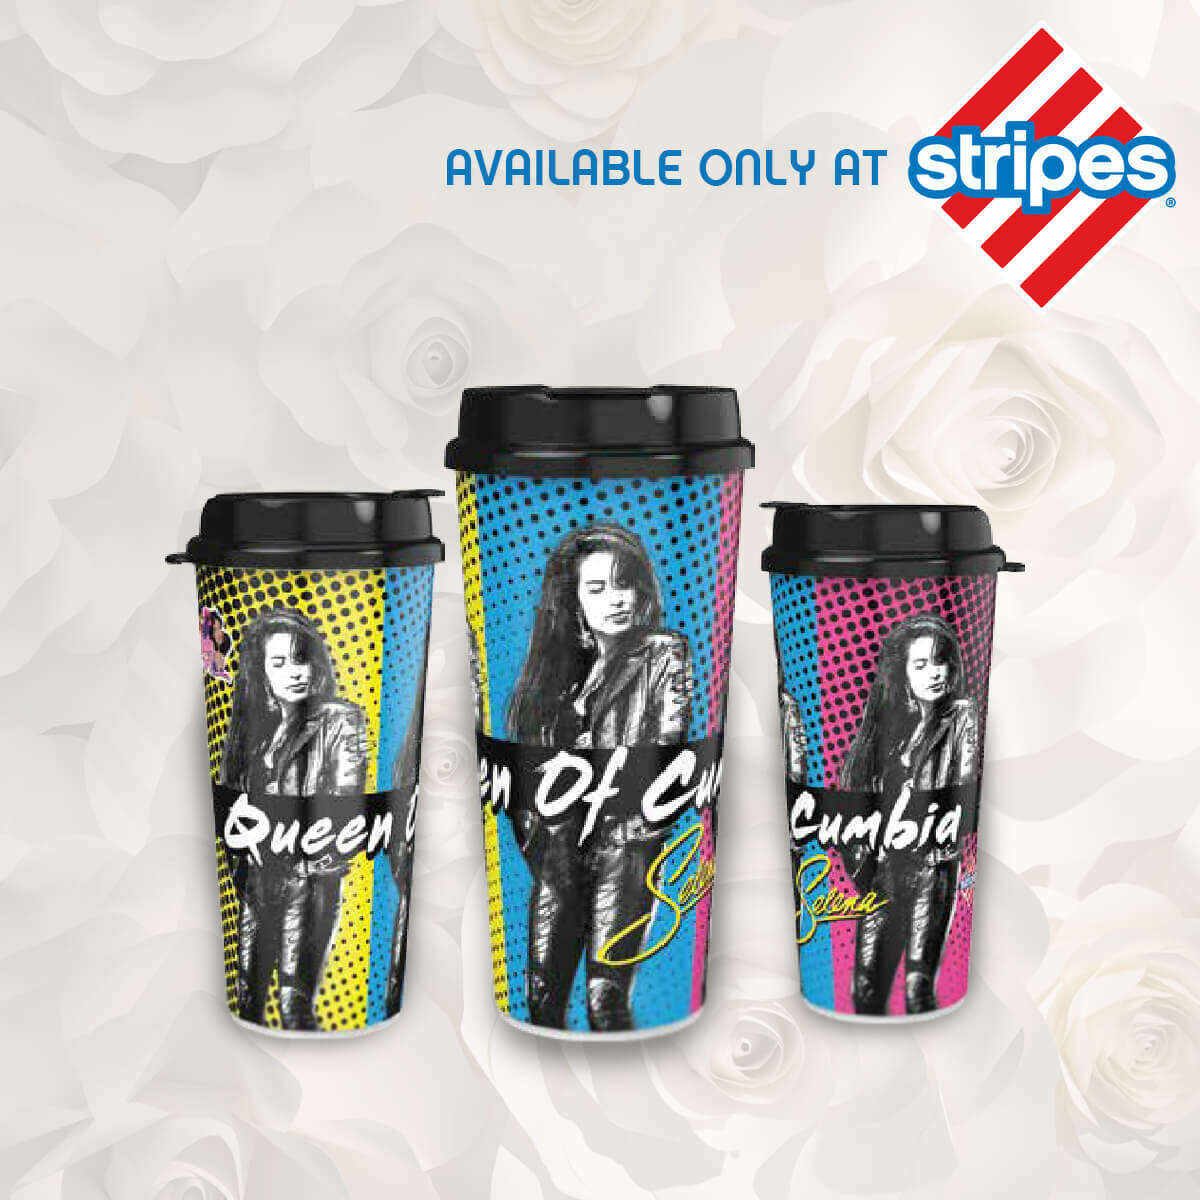 Stripes Stores worked with the beloved Tejano singer's family to design the 2019 set of limited-edition, collectible cups featuring Selena. Each of the commemorative cups in this year's trio are insulated to hold hot and cold beverages and will be sold for $3.99 a piece, according to a news release.